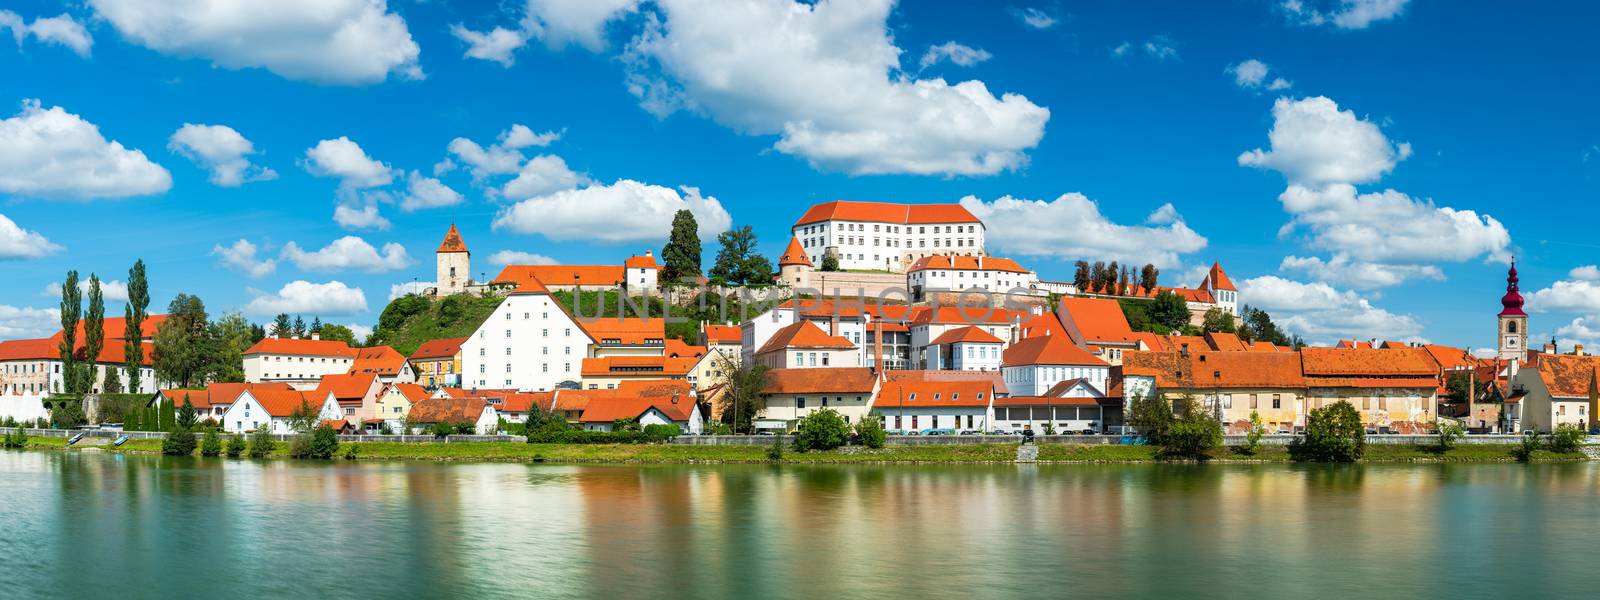 Ptuj Grad in Slovenia with Castle and Cathedral at River Drava. Wide Panoramic Image.